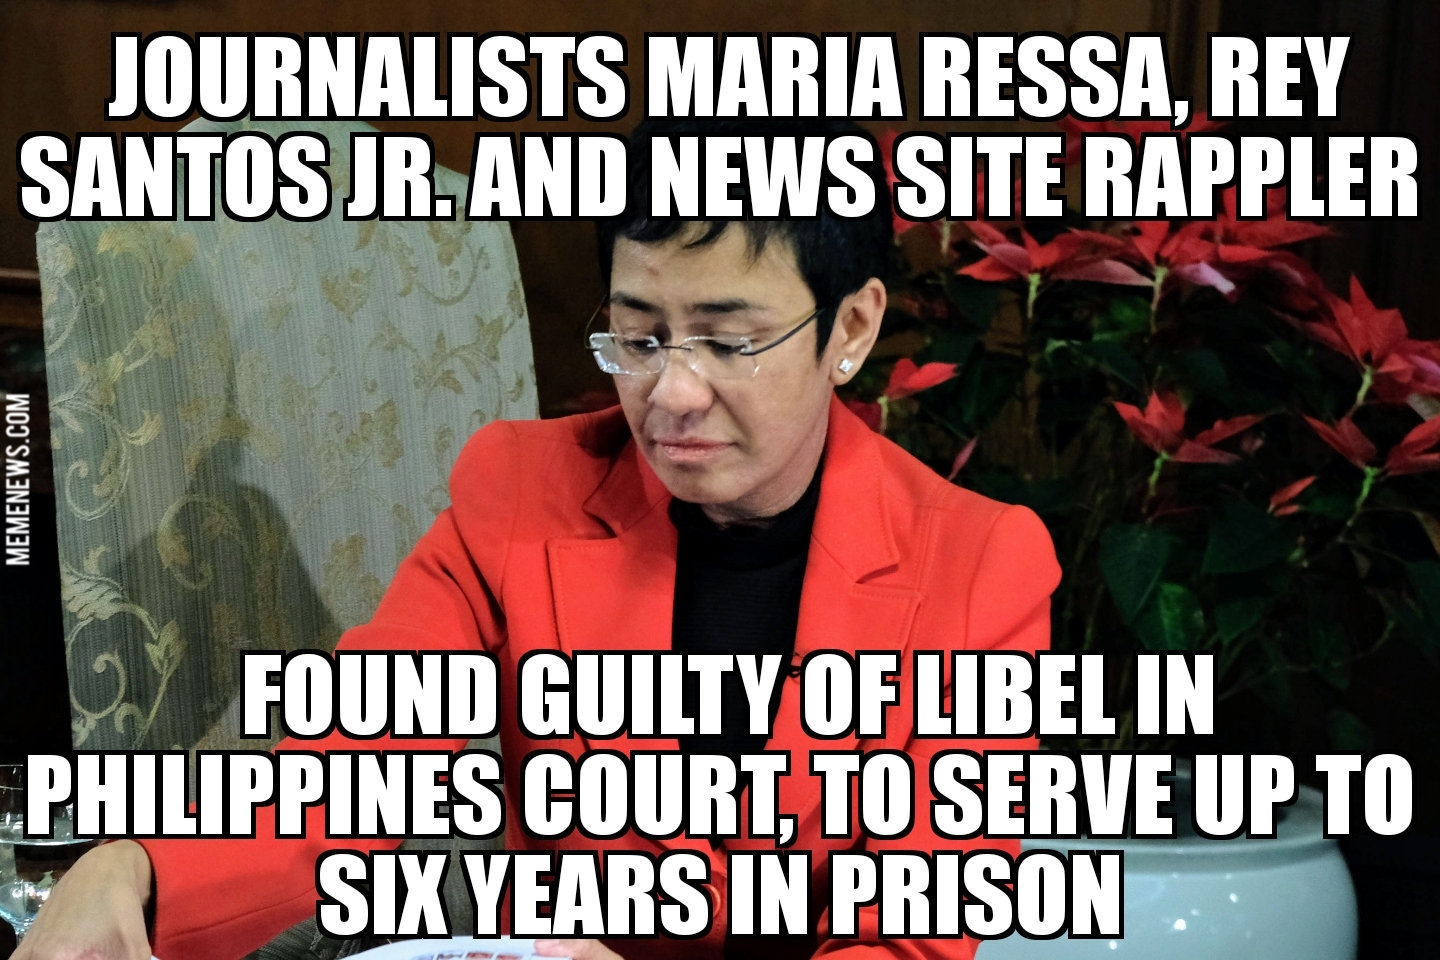 Maria Ressa and Rappler found guilty of libel